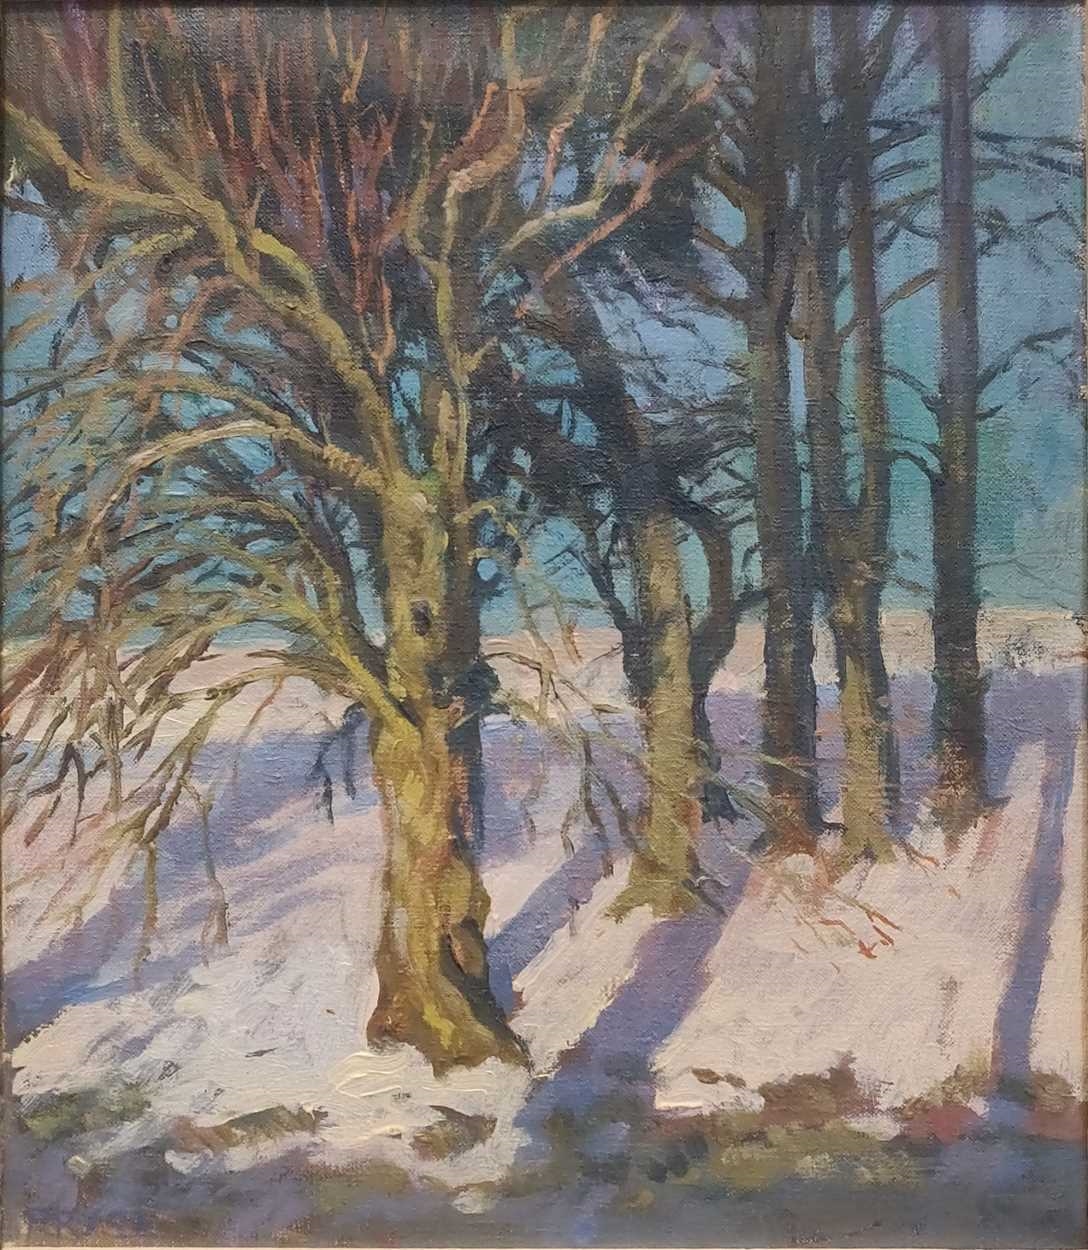 Artwork by Tessa Spencer  Pryse, Trees in snow, Raddery, Made of oil on canvas